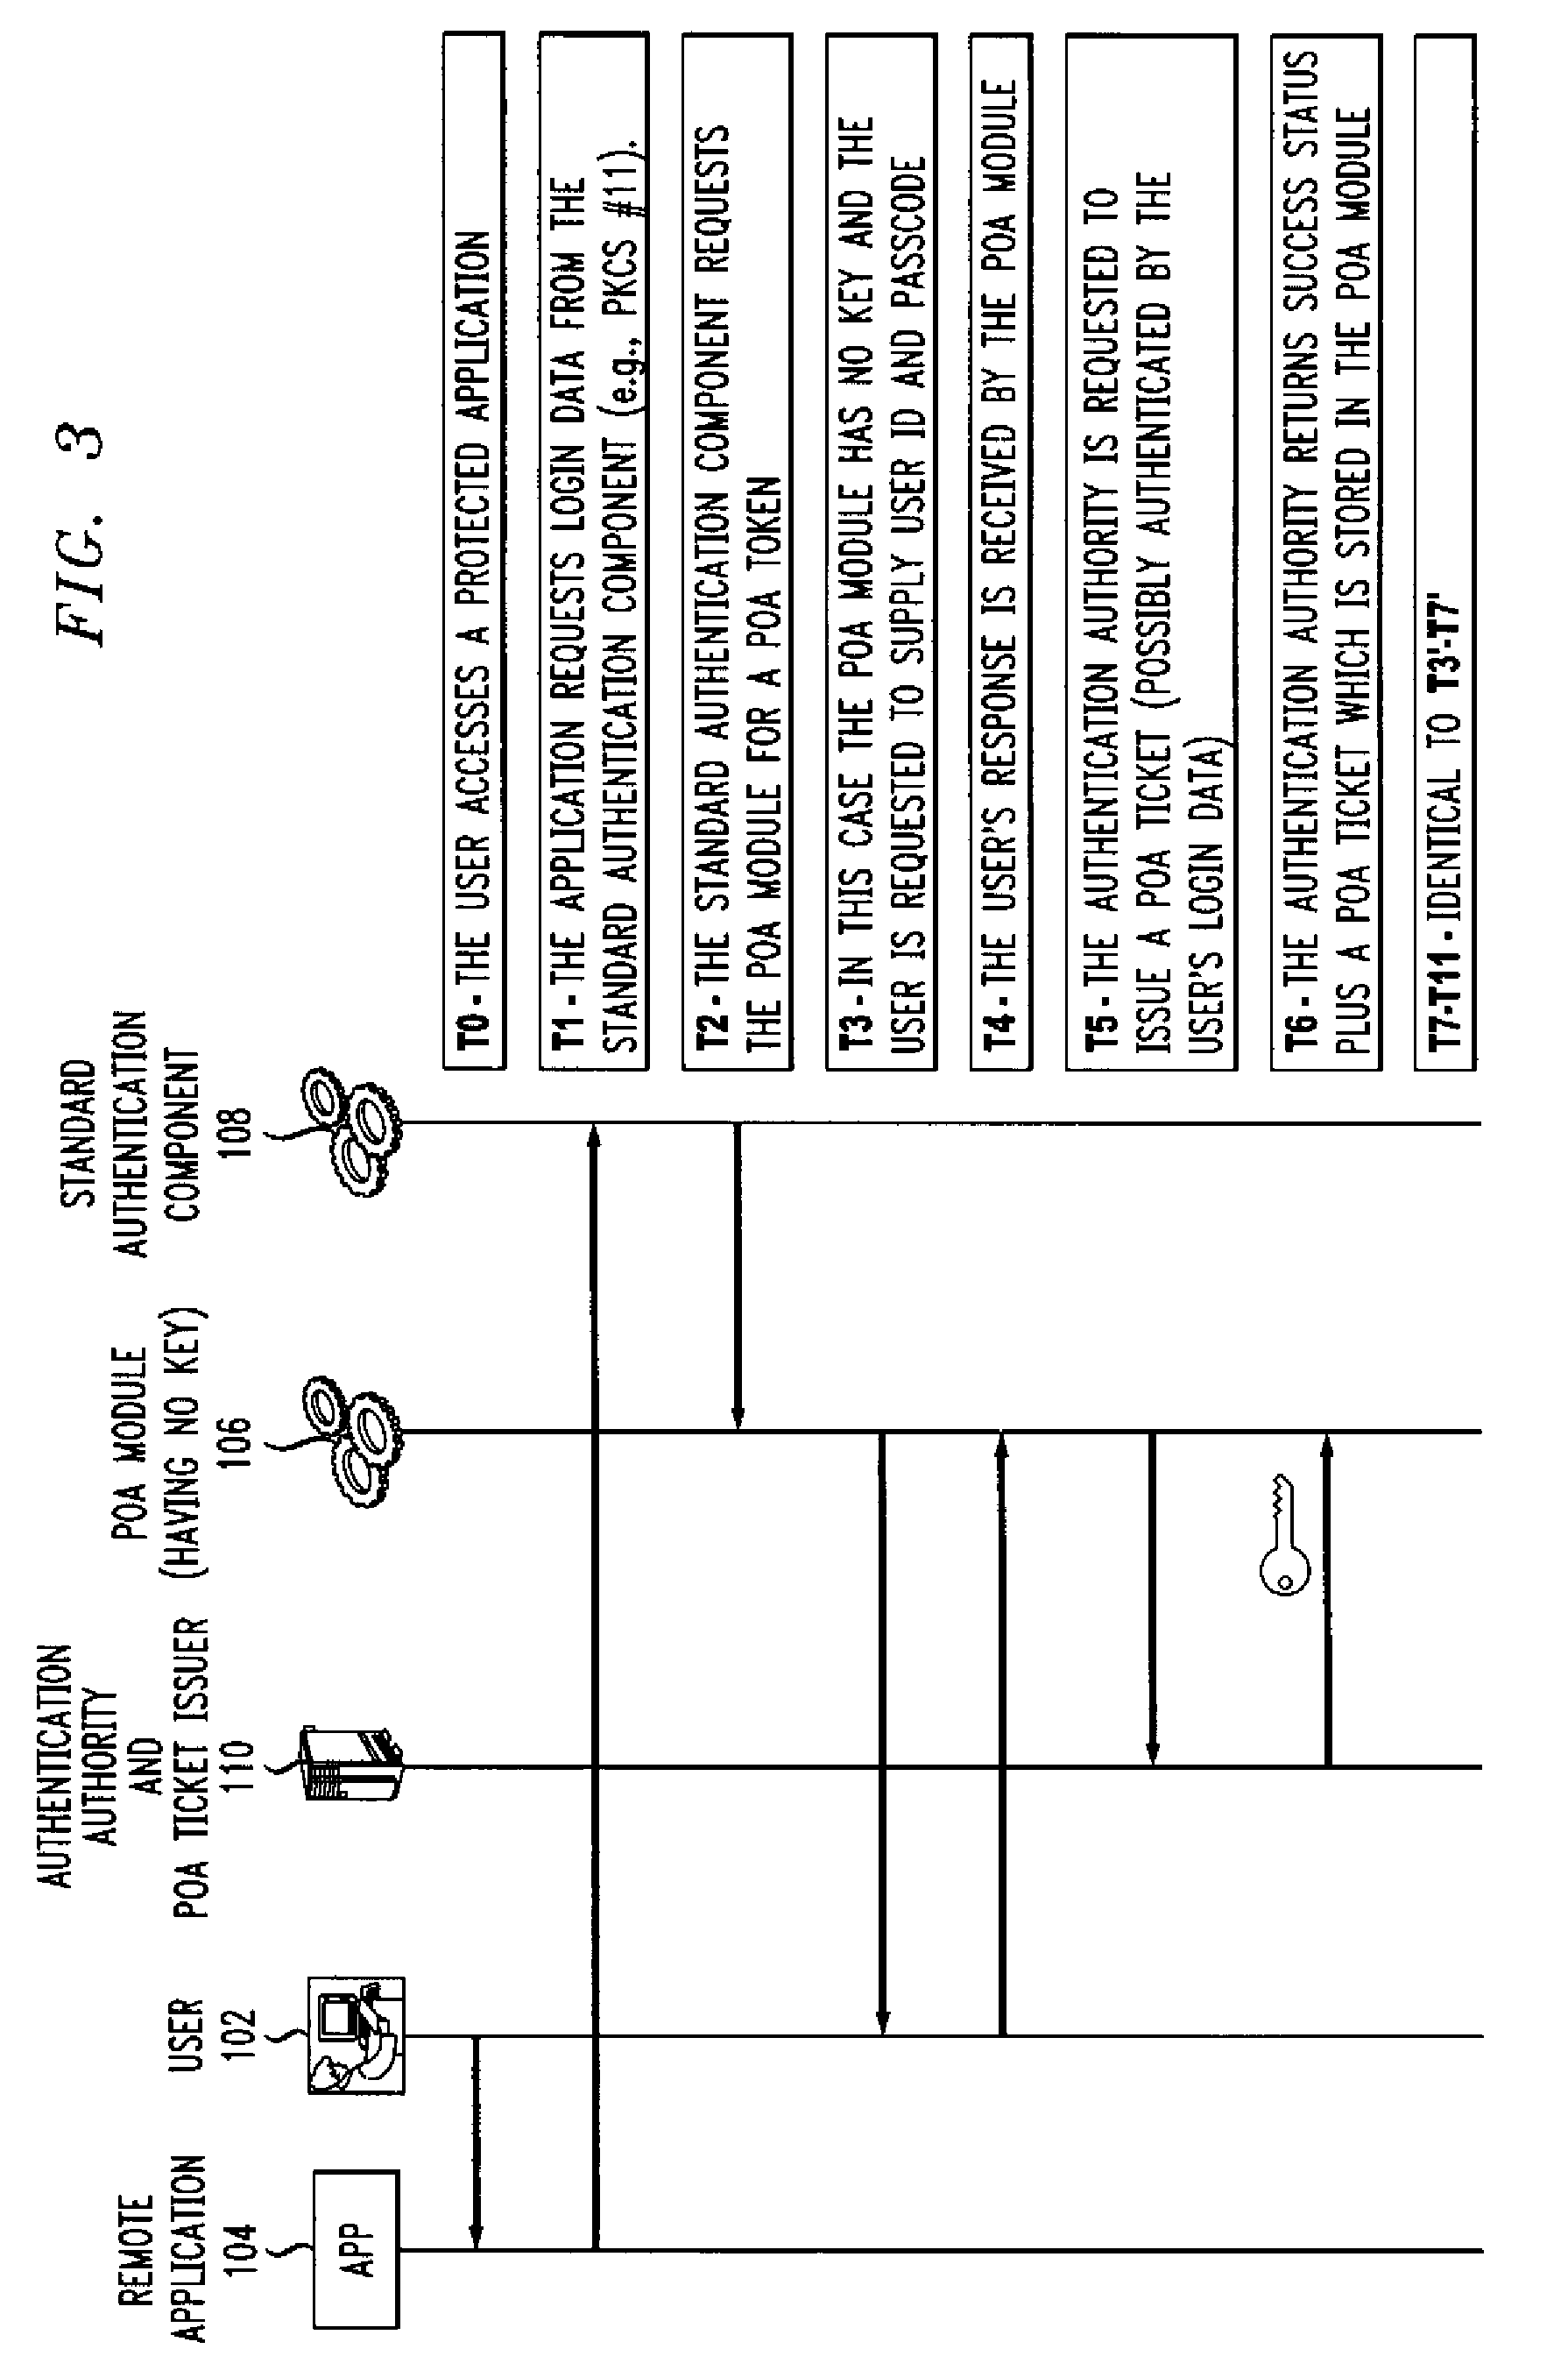 Authentication method and apparatus utilizing proof-of-authentication module